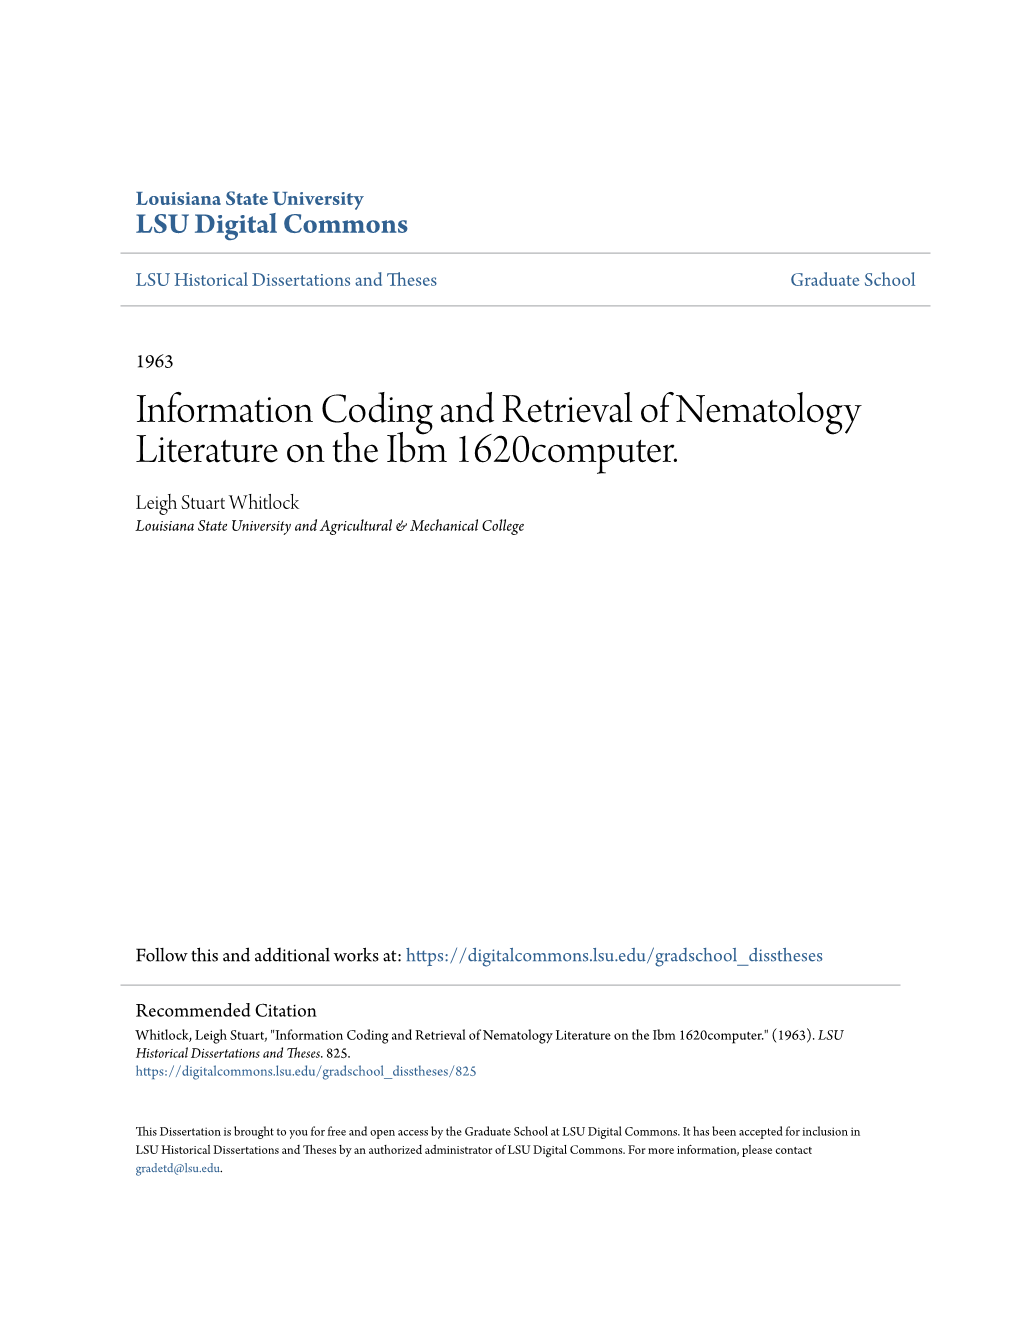 Information Coding and Retrieval of Nematology Literature on the Ibm 1620Computer